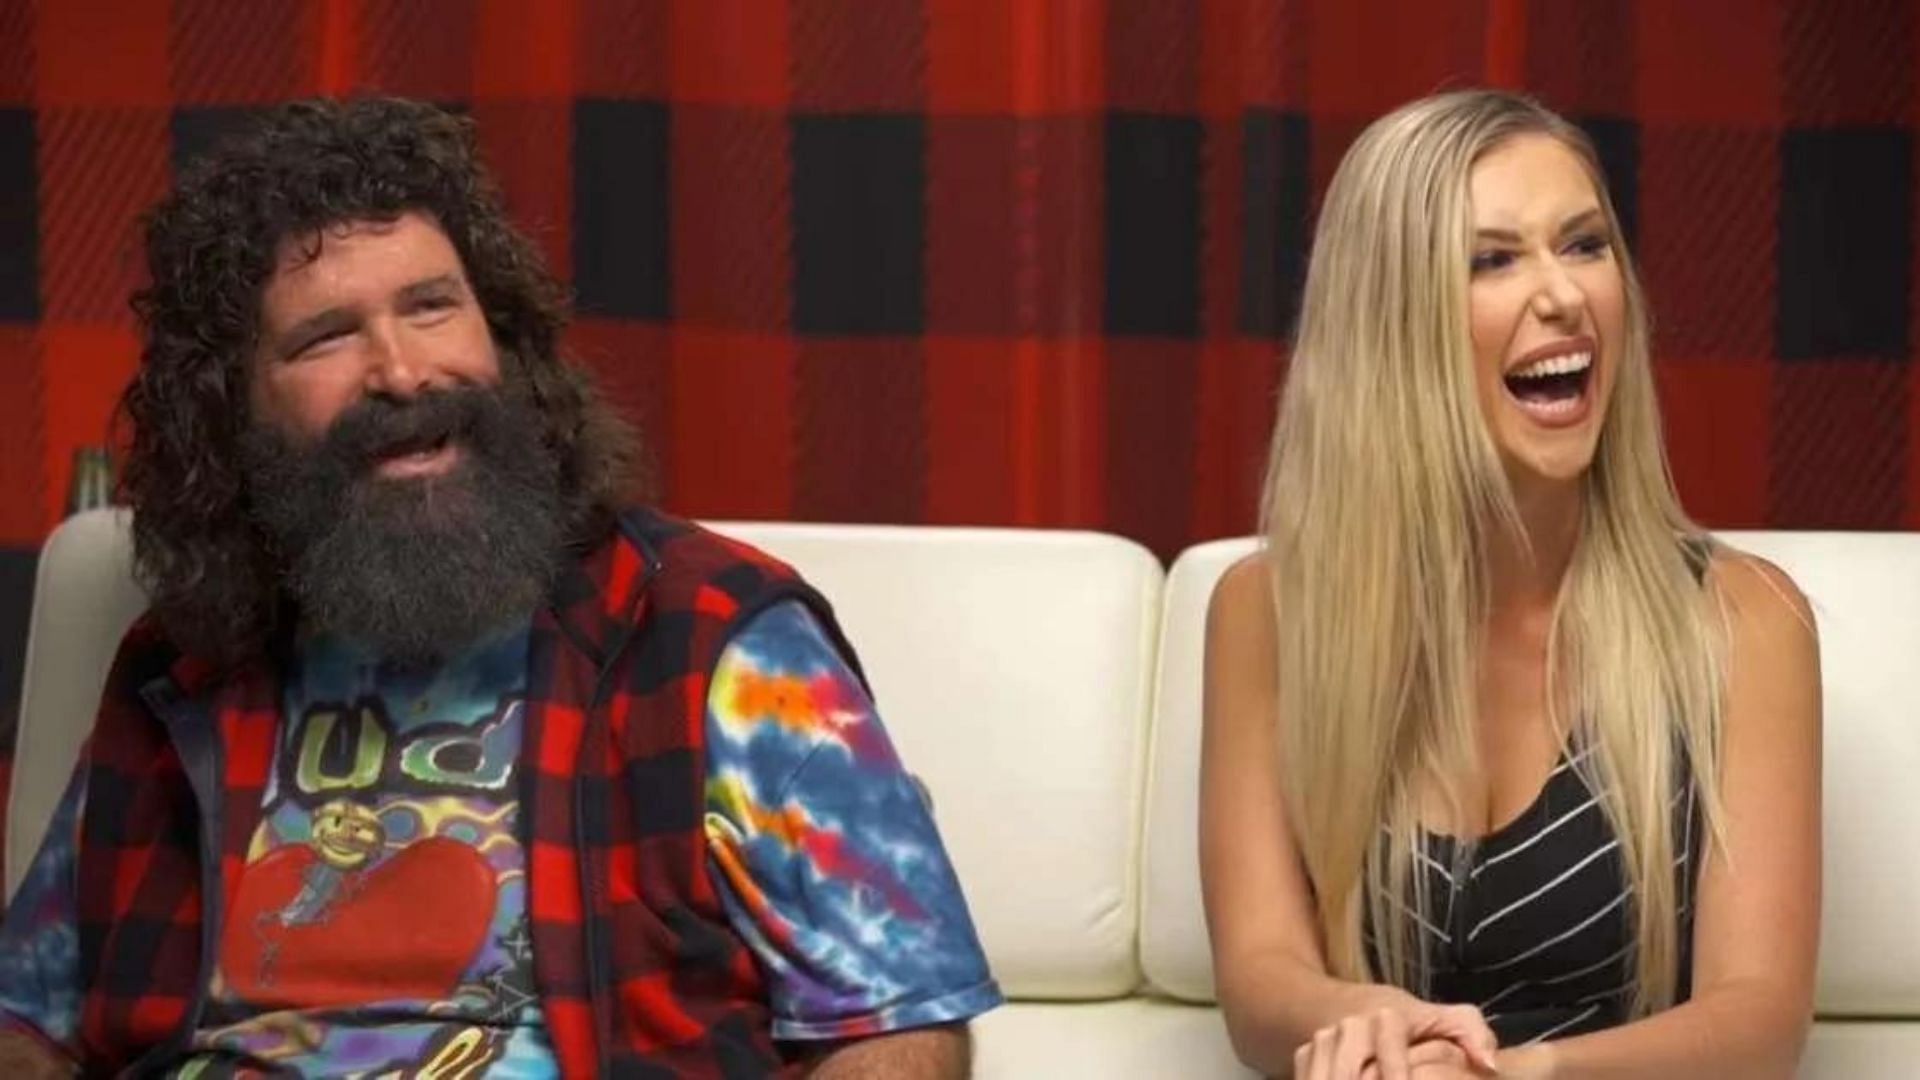 WWE Hall of Famer Mick Foley with his daughter Noelle Foley